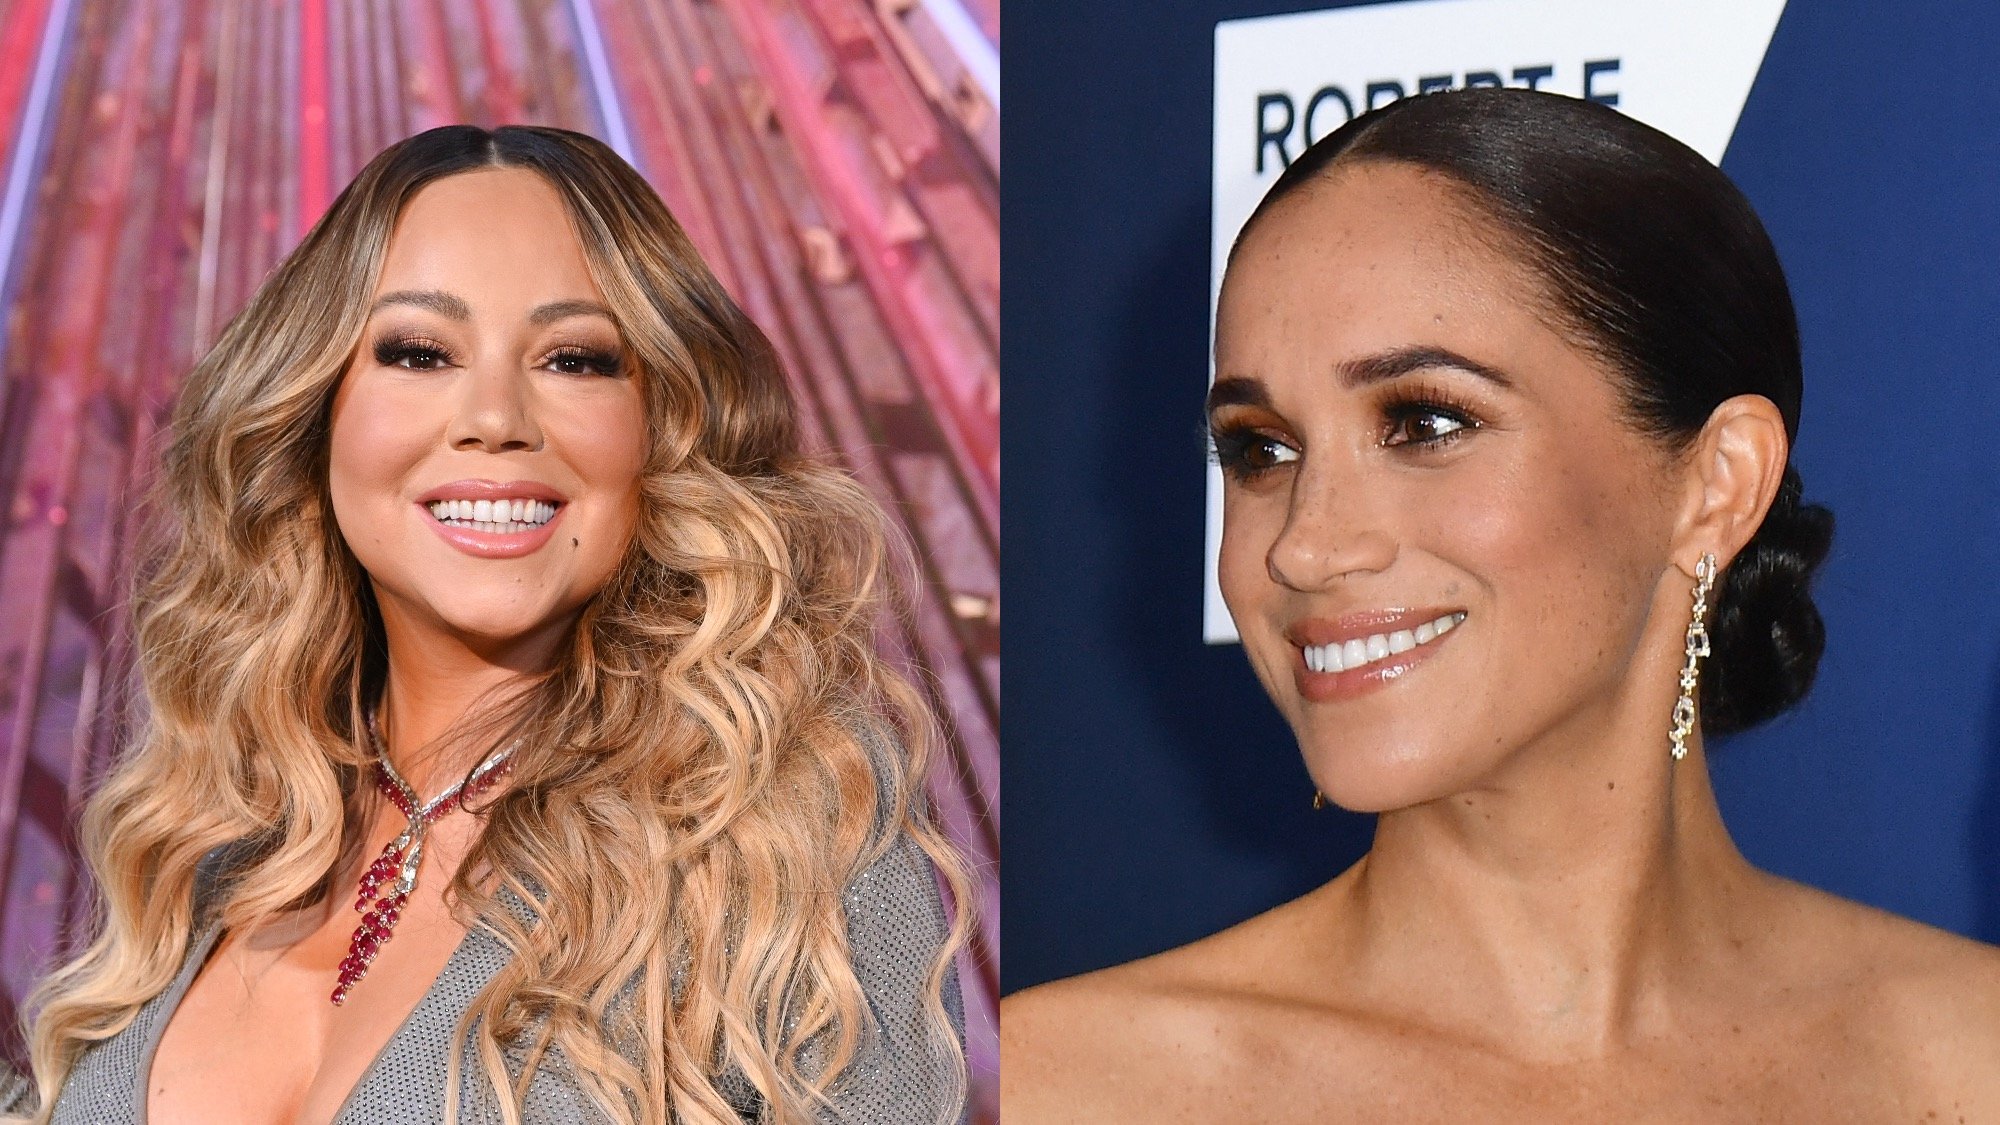 Meghan Markle Bonded With Mariah Carey Over Styling Their Natural Hair